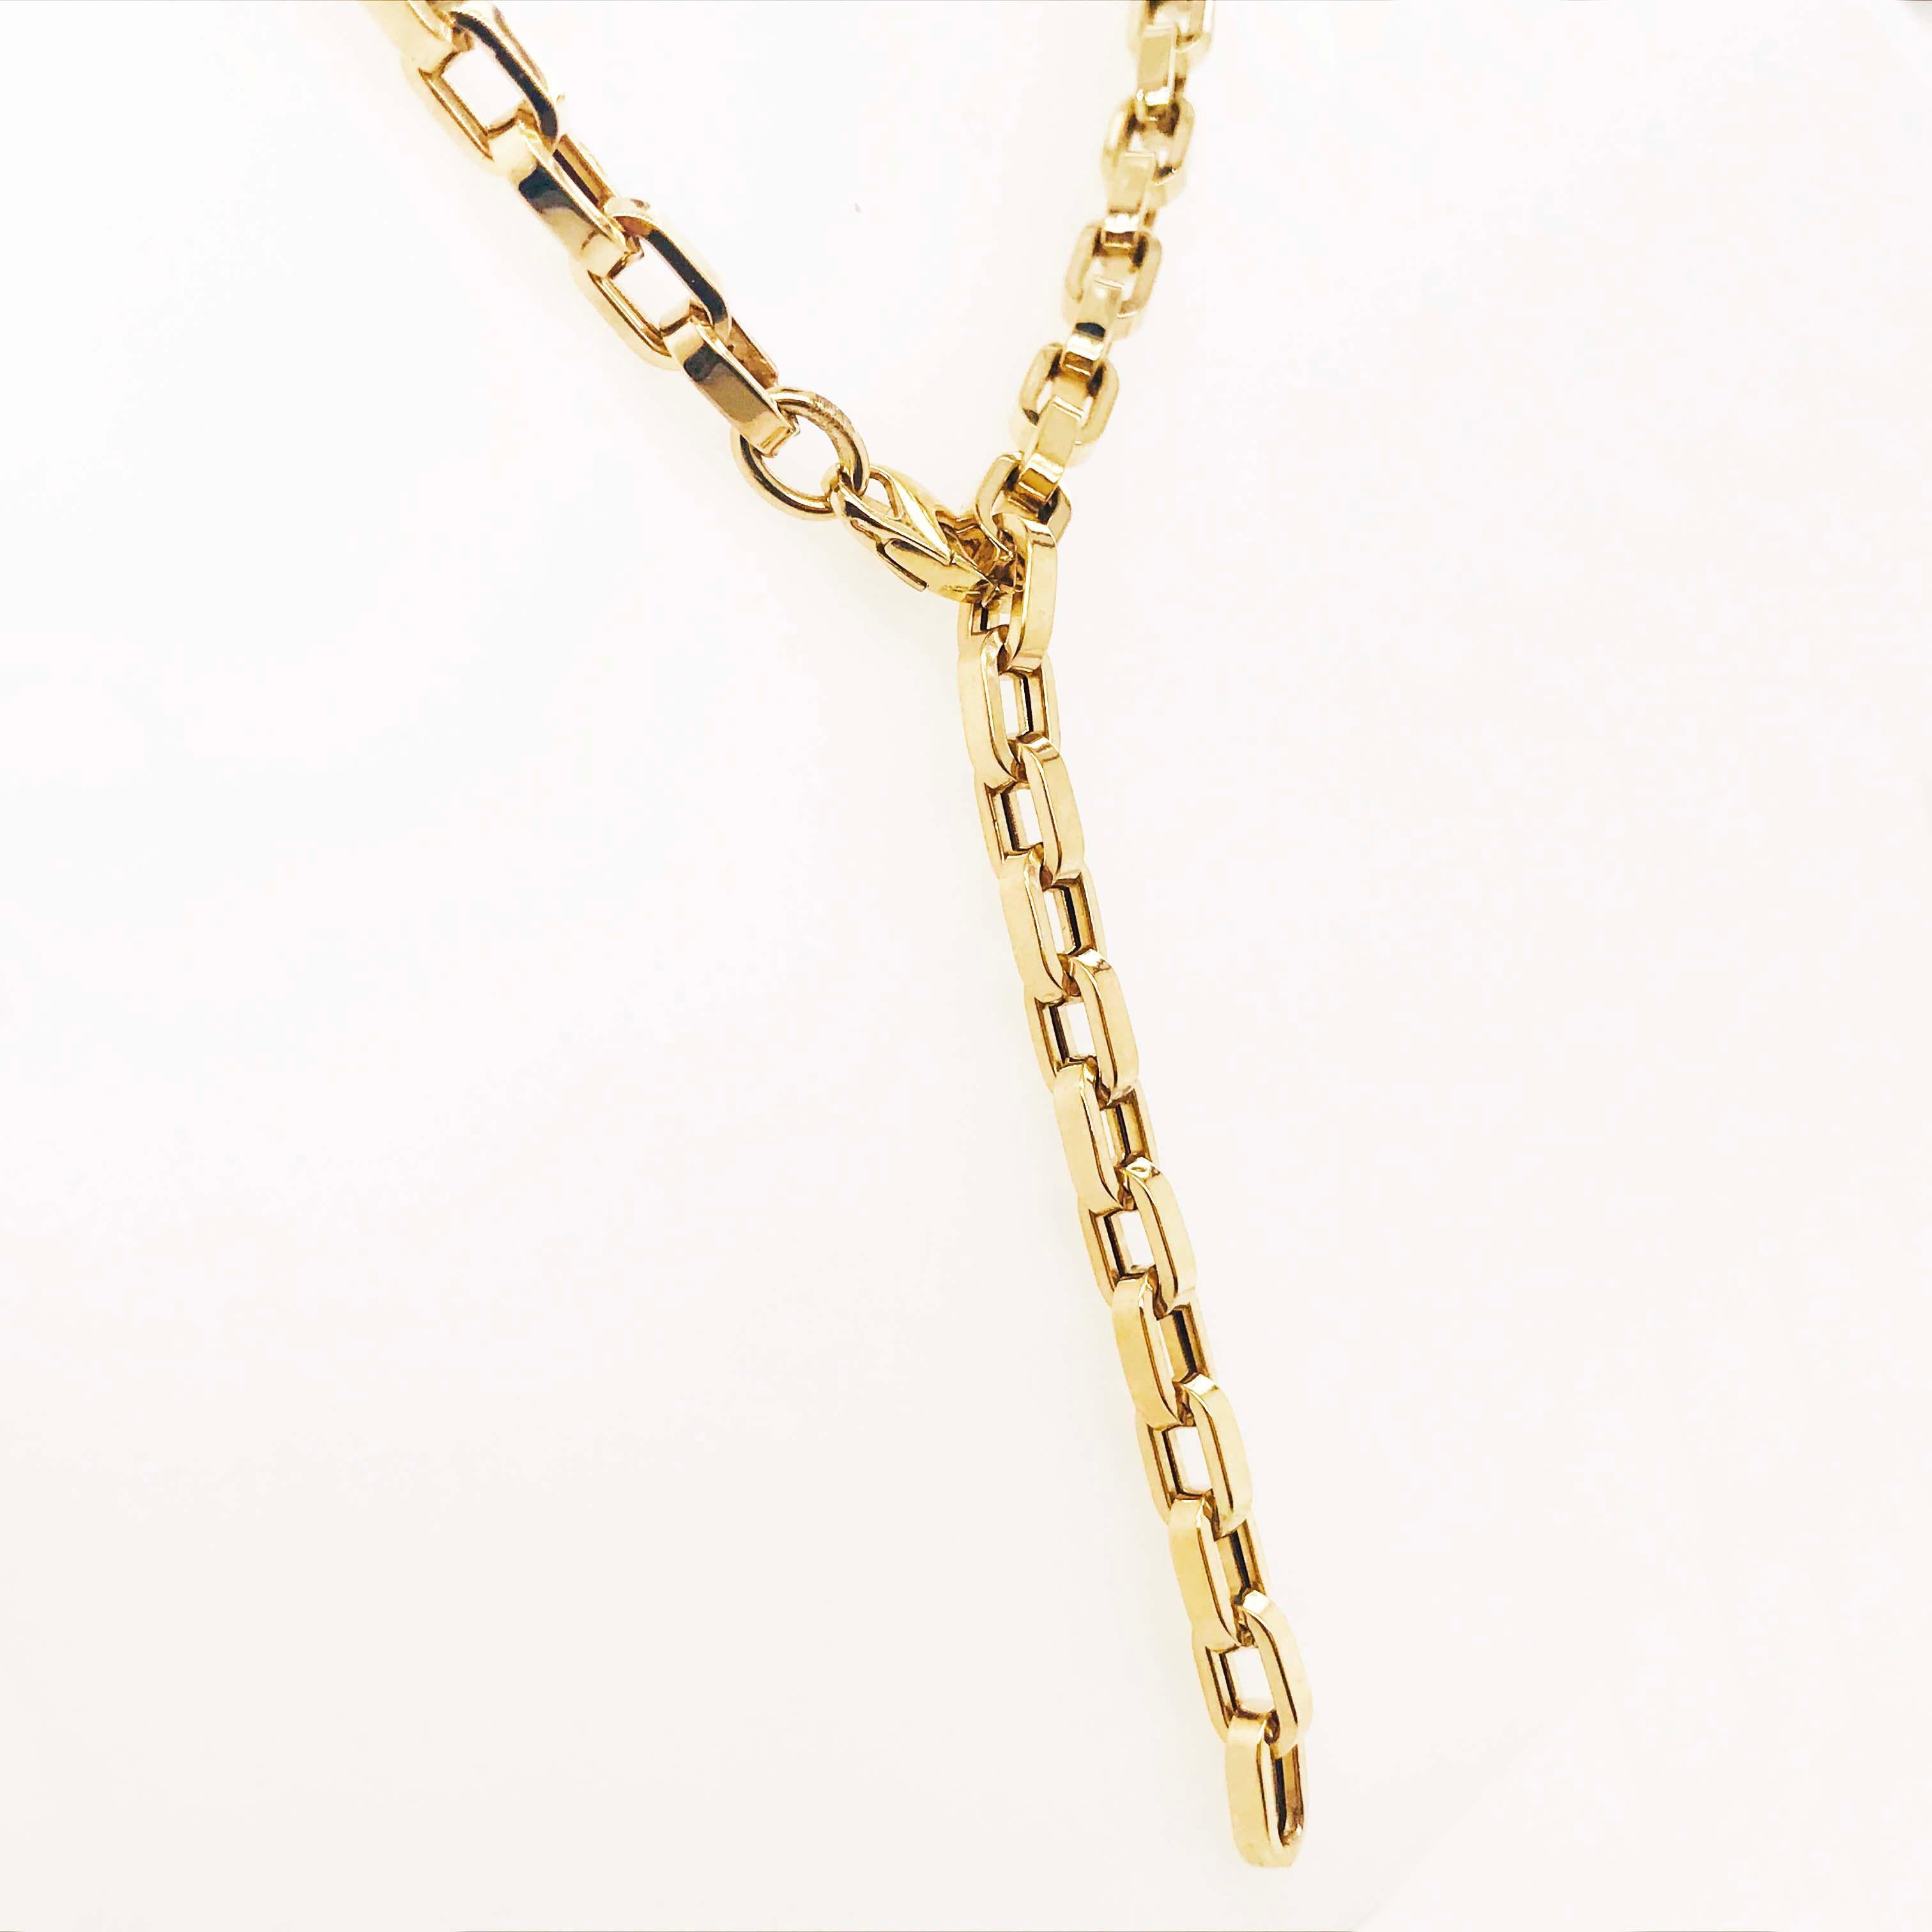 Modern Large 14k Link Chain Necklace, PaperClip Chain Cable w Large Clasp in 14kt Gold